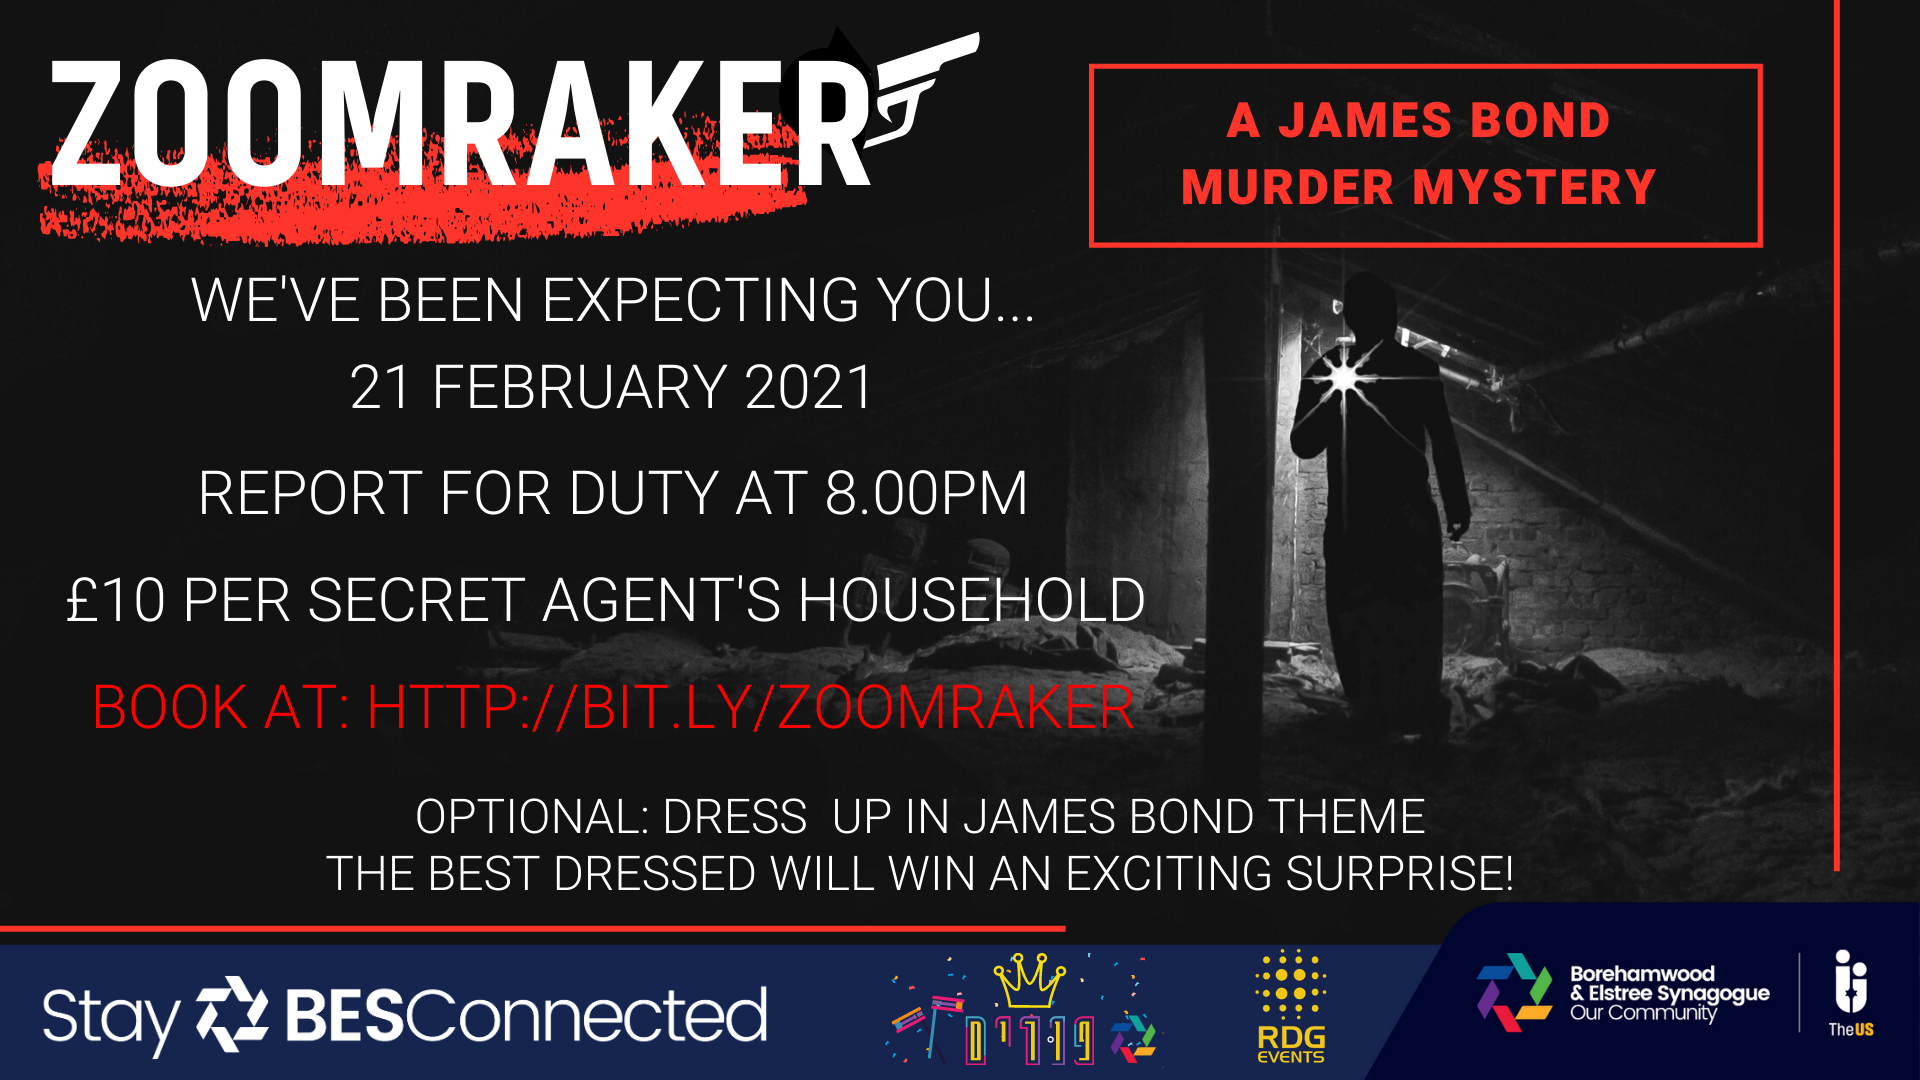 Zoomraker-Murder-Mystery-3.png?mtime=20210112161824&focal=none